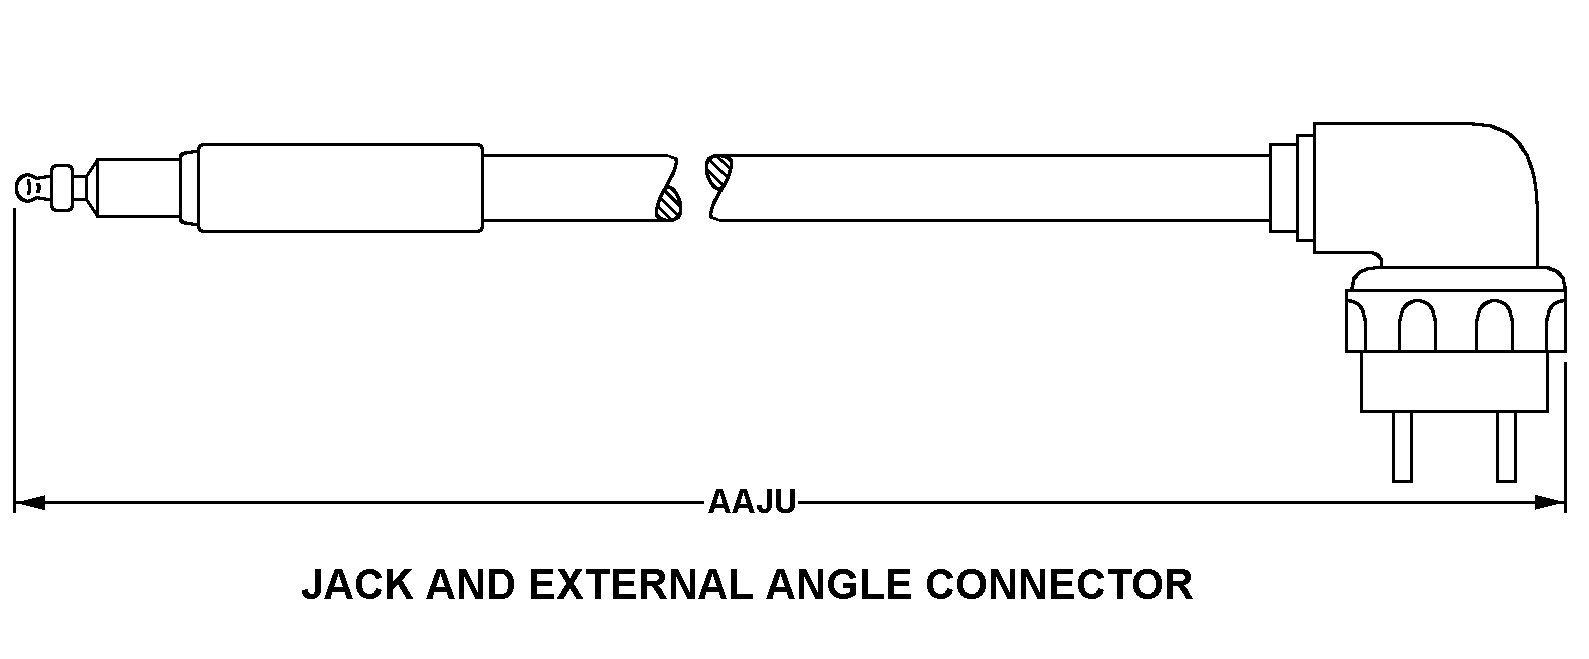 JACK AND EXTERNAL ANGLE CONNECTOR style nsn 5995-01-301-5836